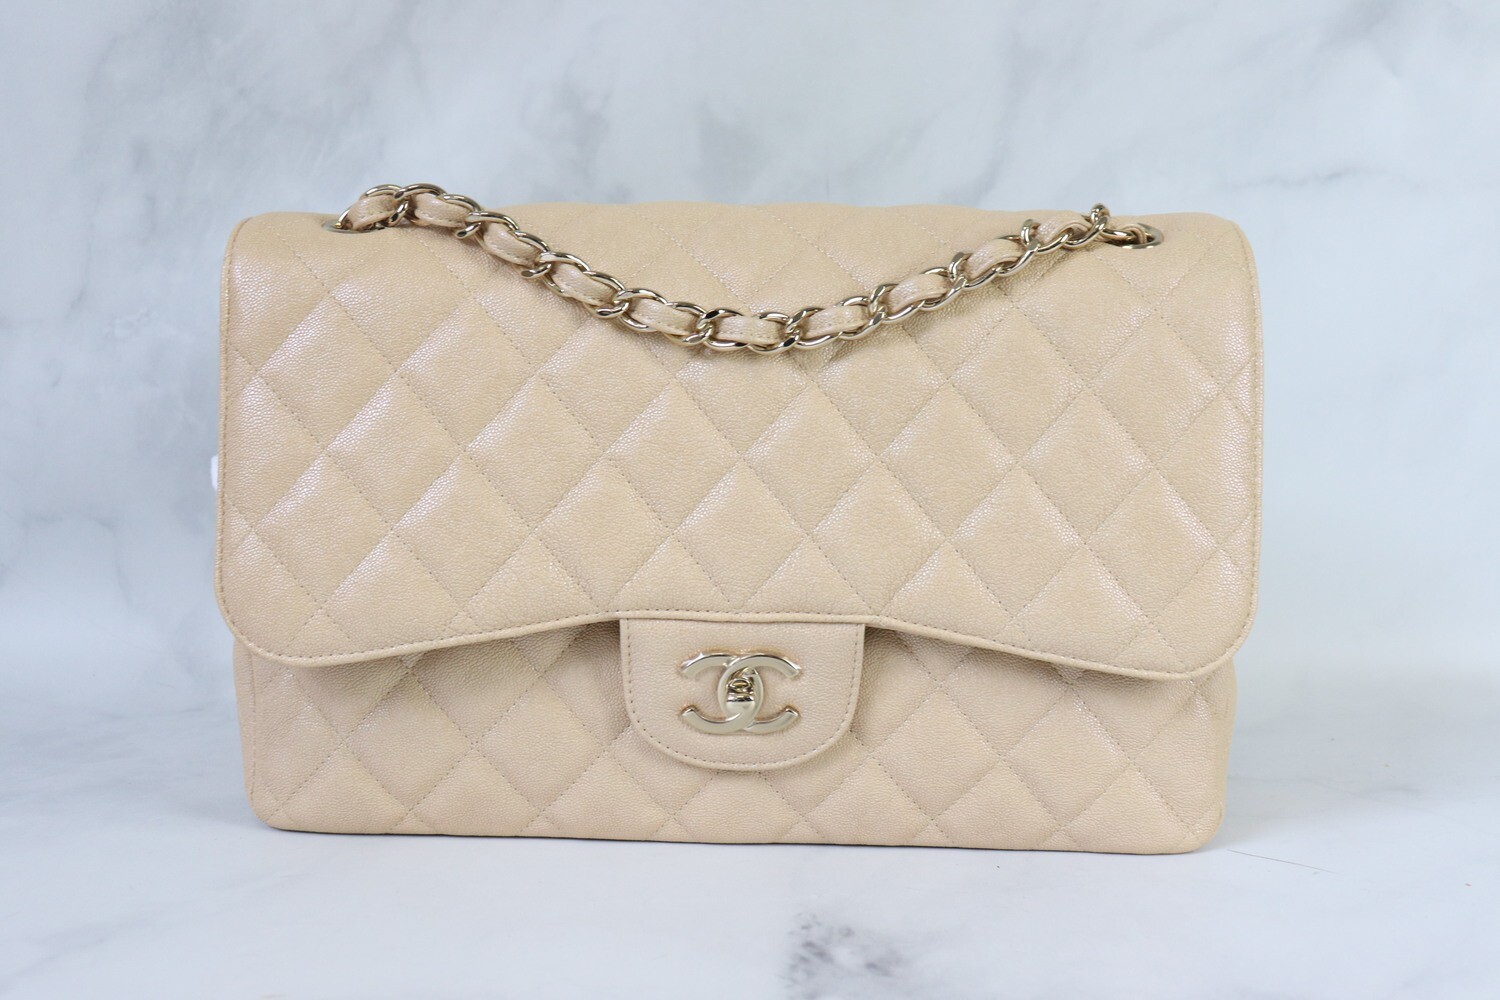 CHANEL Caviar Quilted Medium Double Flap Bag Beige